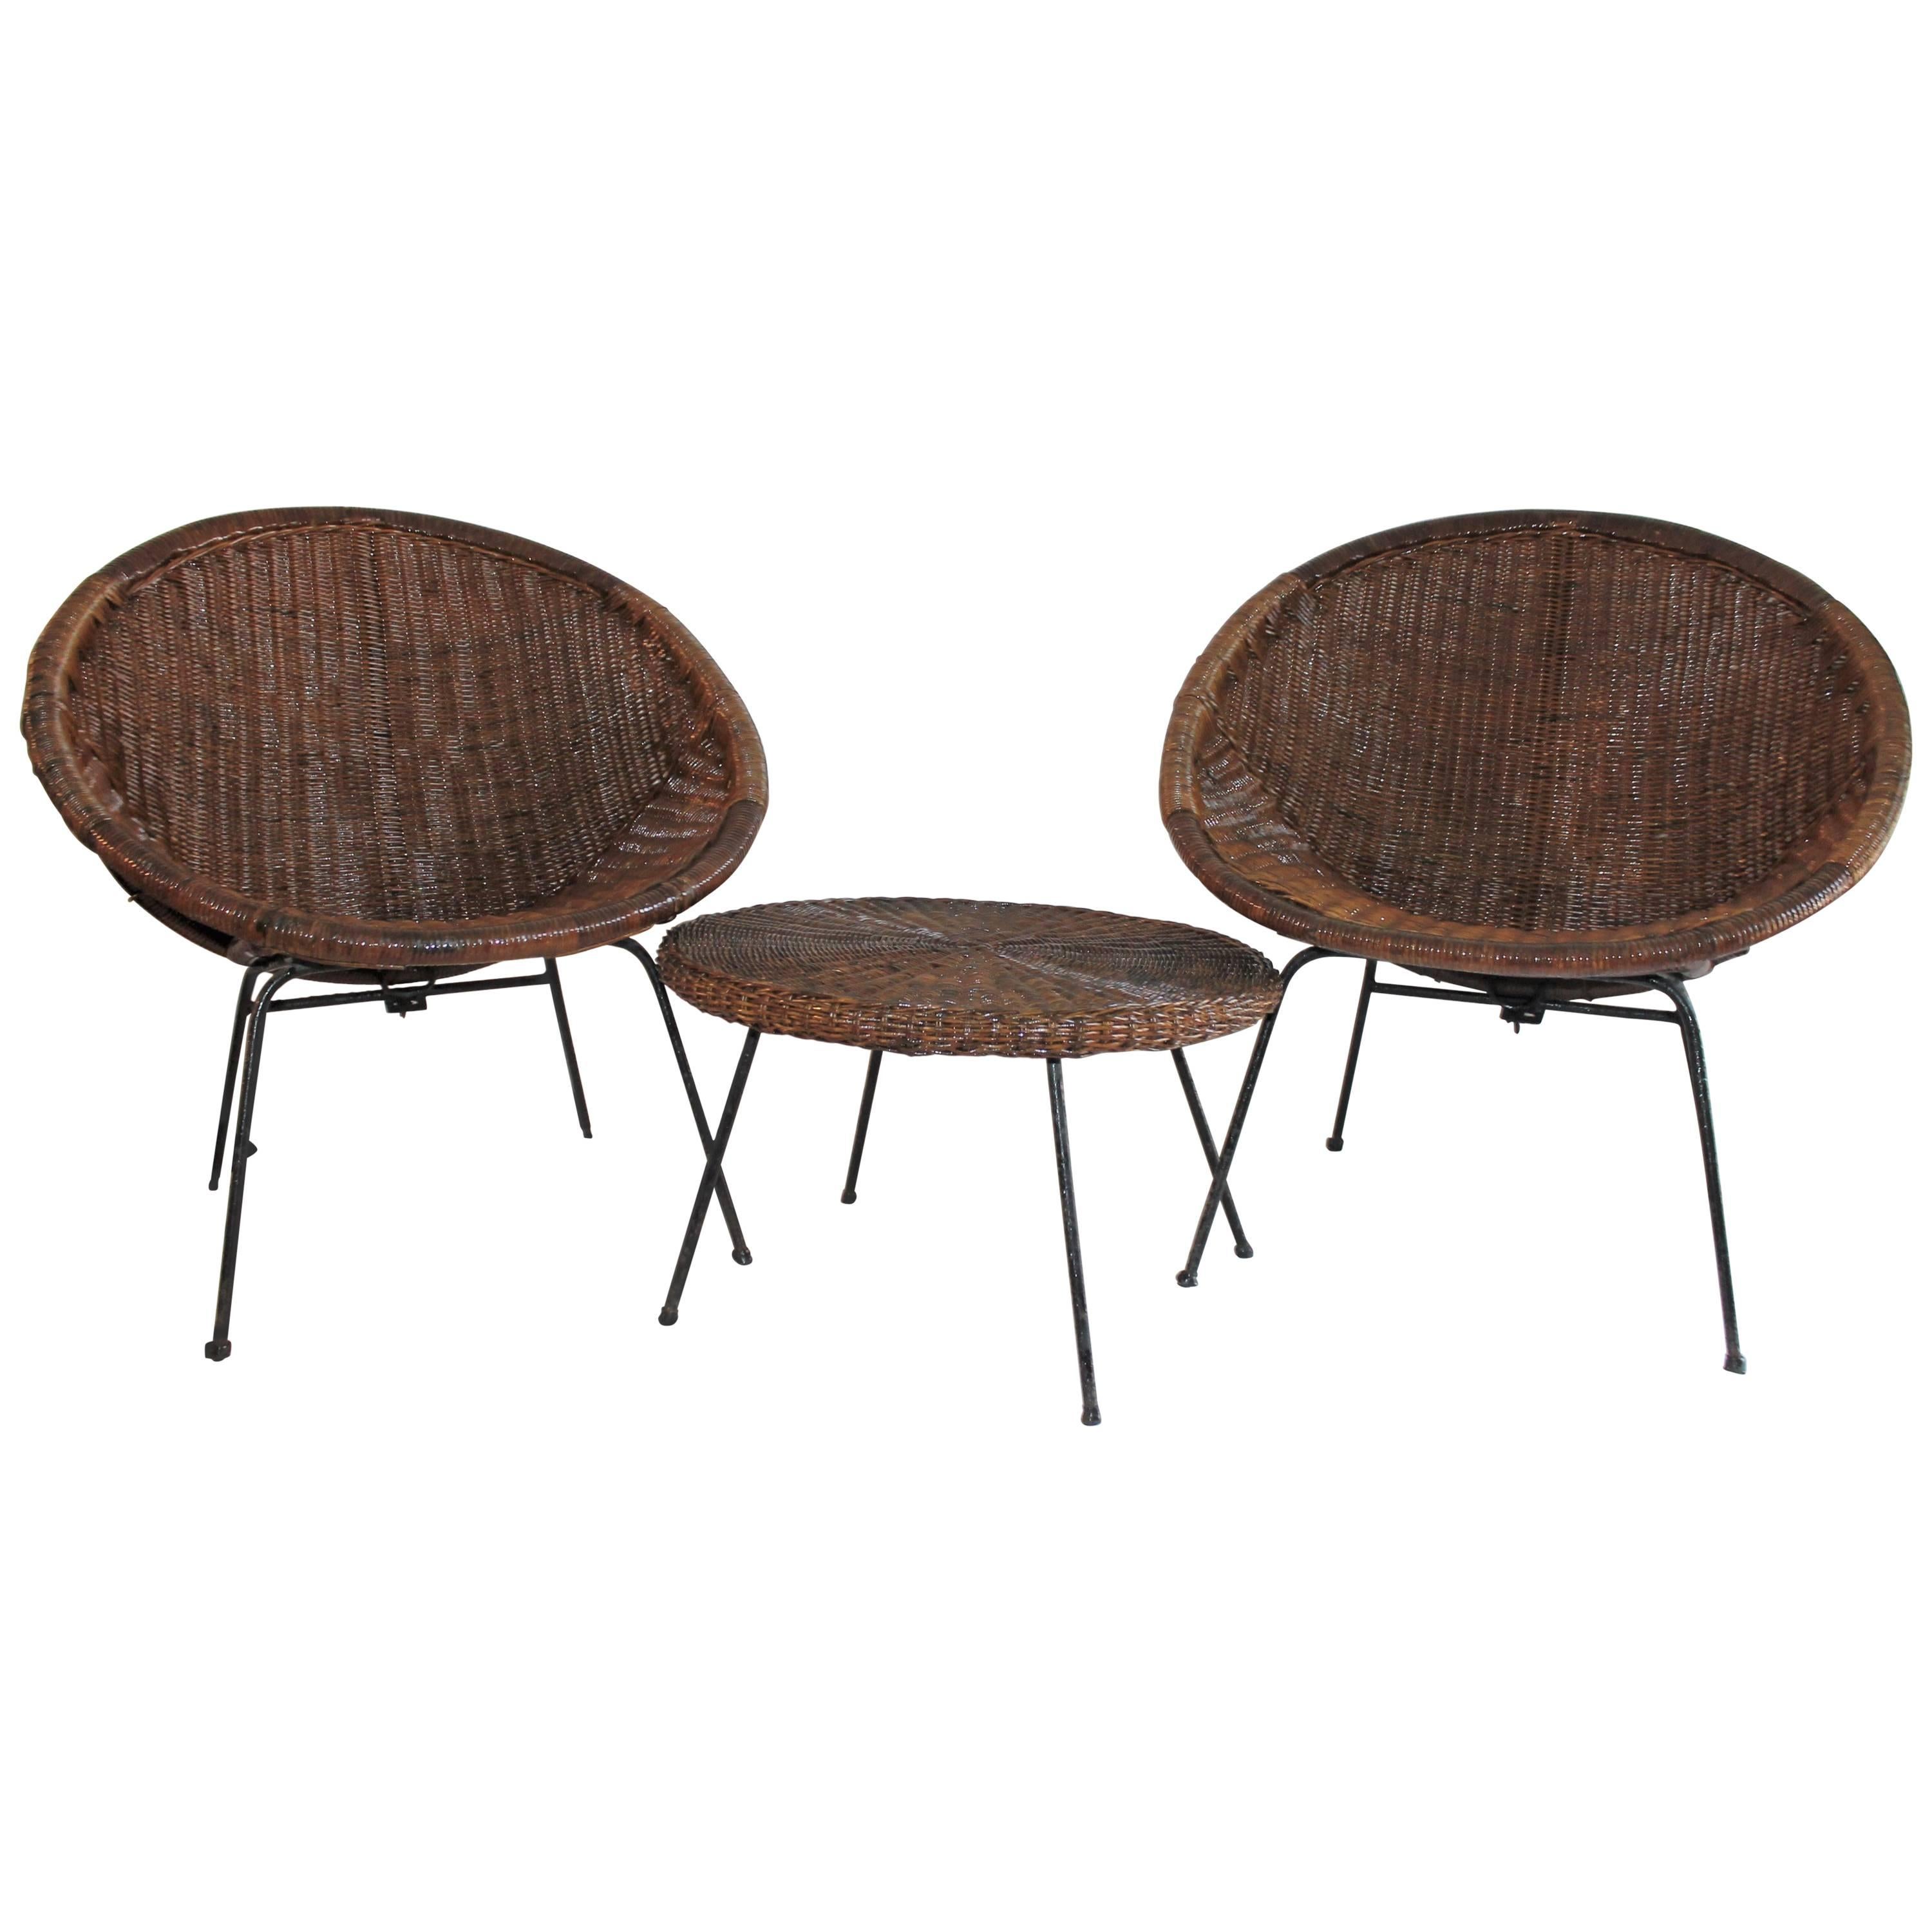 Cone Wicker Chair and Side Table Set / Three Pieces Set